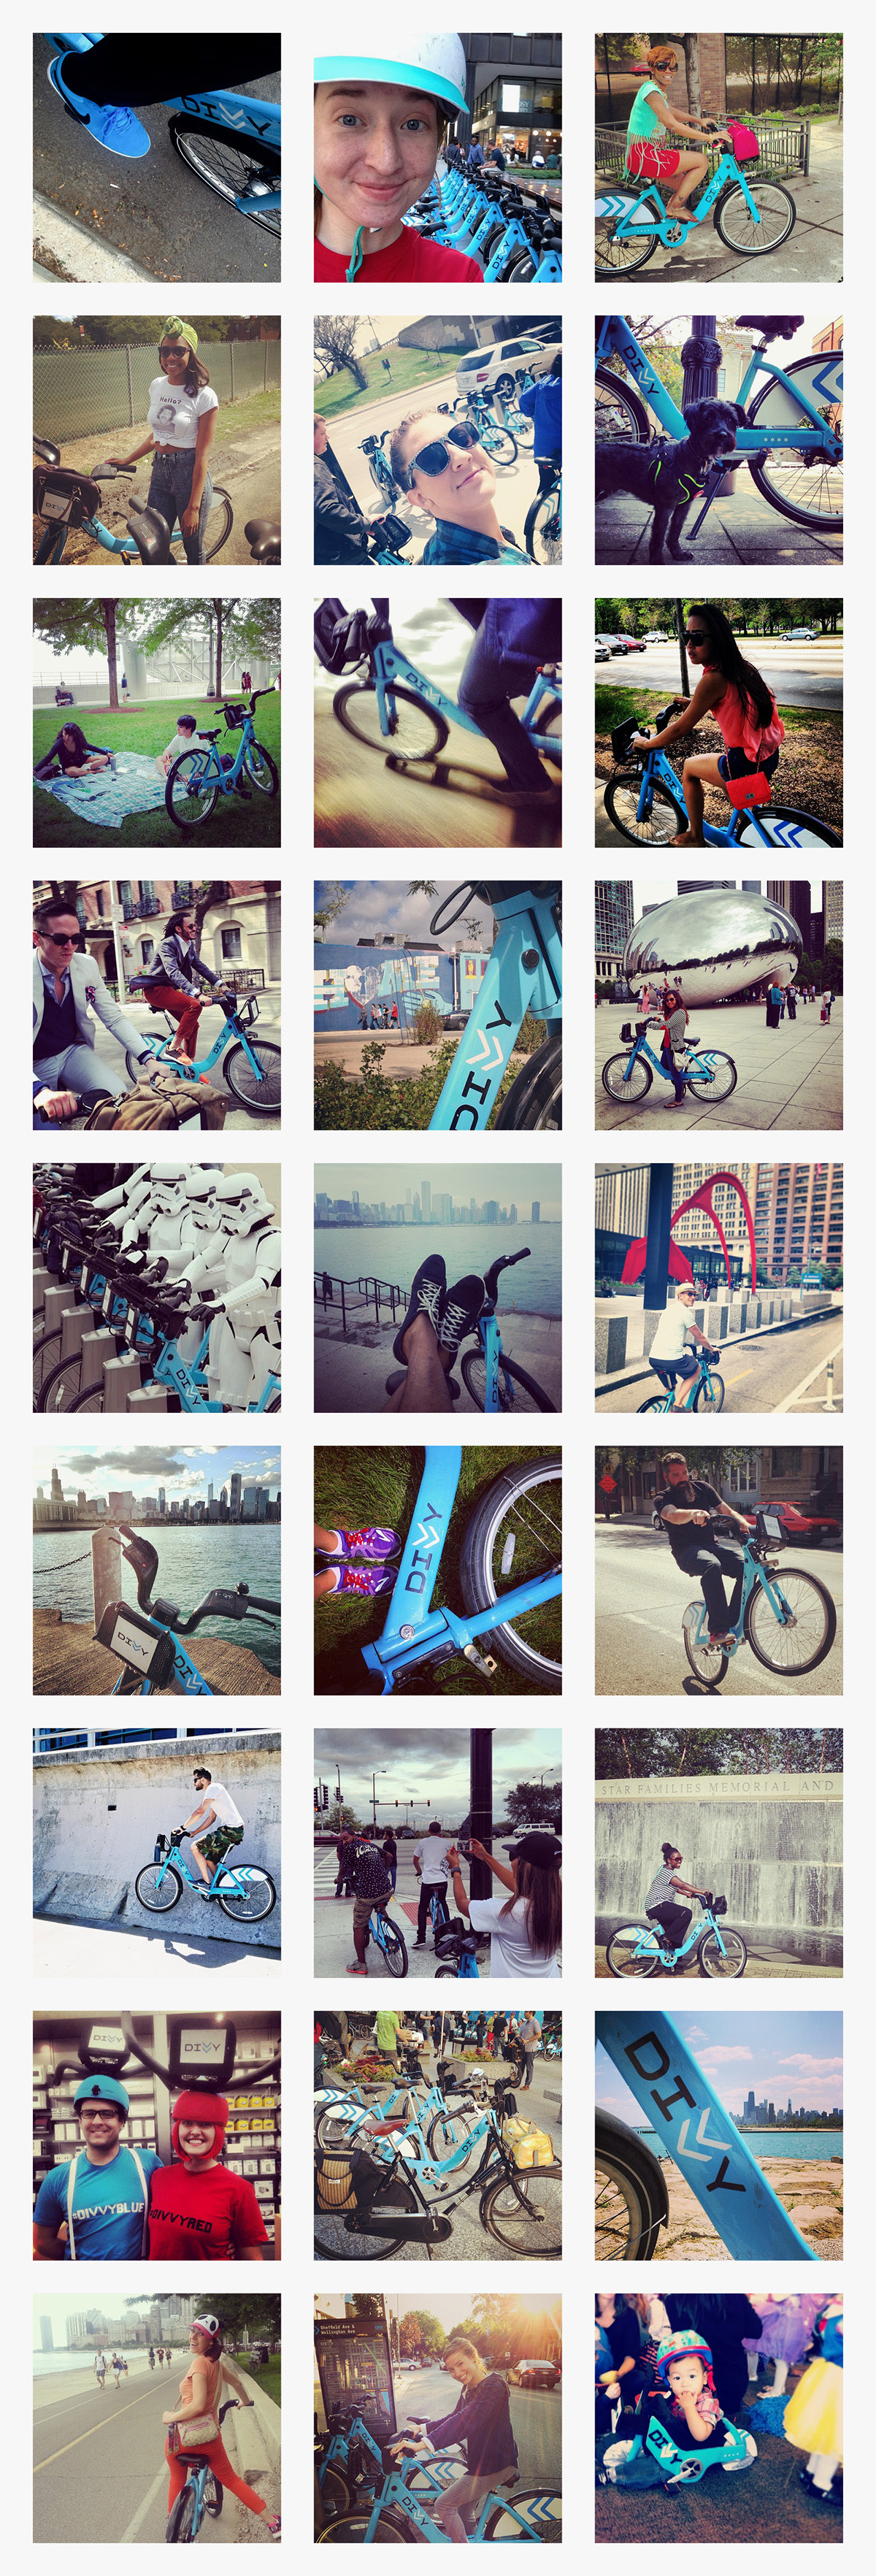 Adobe Portfolio transportation Transit Bicycle bicycle share chicago Divvy human centered bike share Identity System Brand System brand guidelines